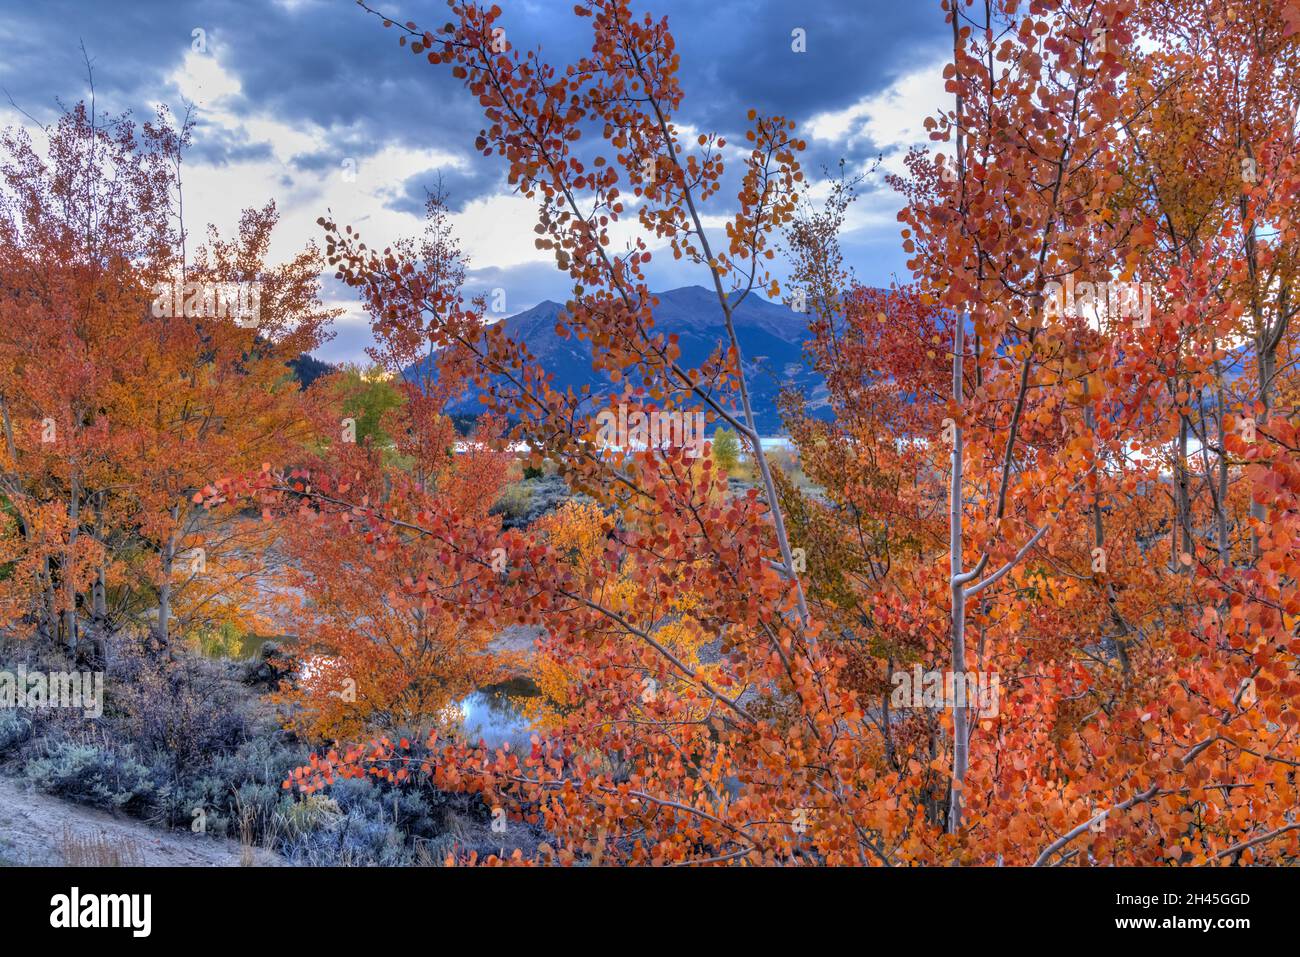 Red and orange aspens trees on the shore of Twin Lakes, with Mt. Ebert, the tallest mountain in Colorado, in the background. Stock Photo